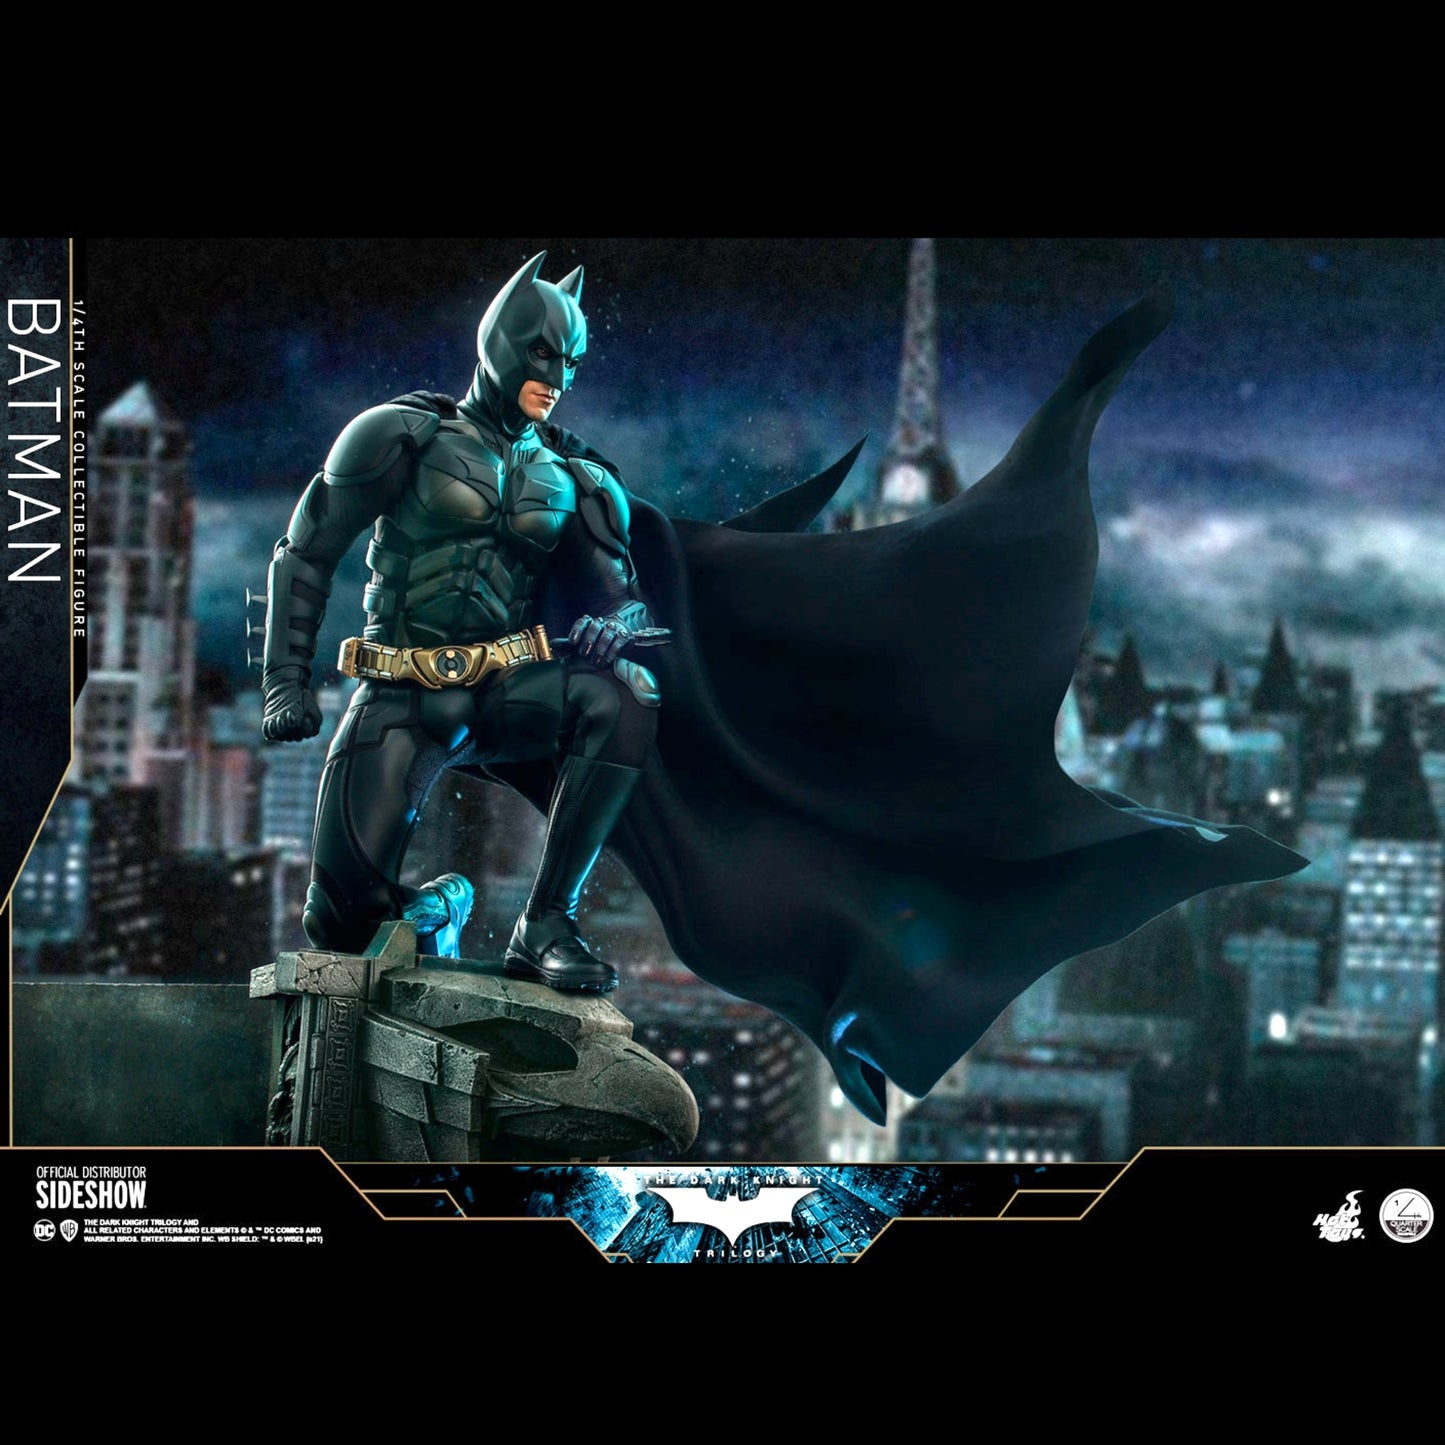 Batman (Collector Edition) Dark Knight Trilogy DC Comics 1:4 Figure by Hot Toys